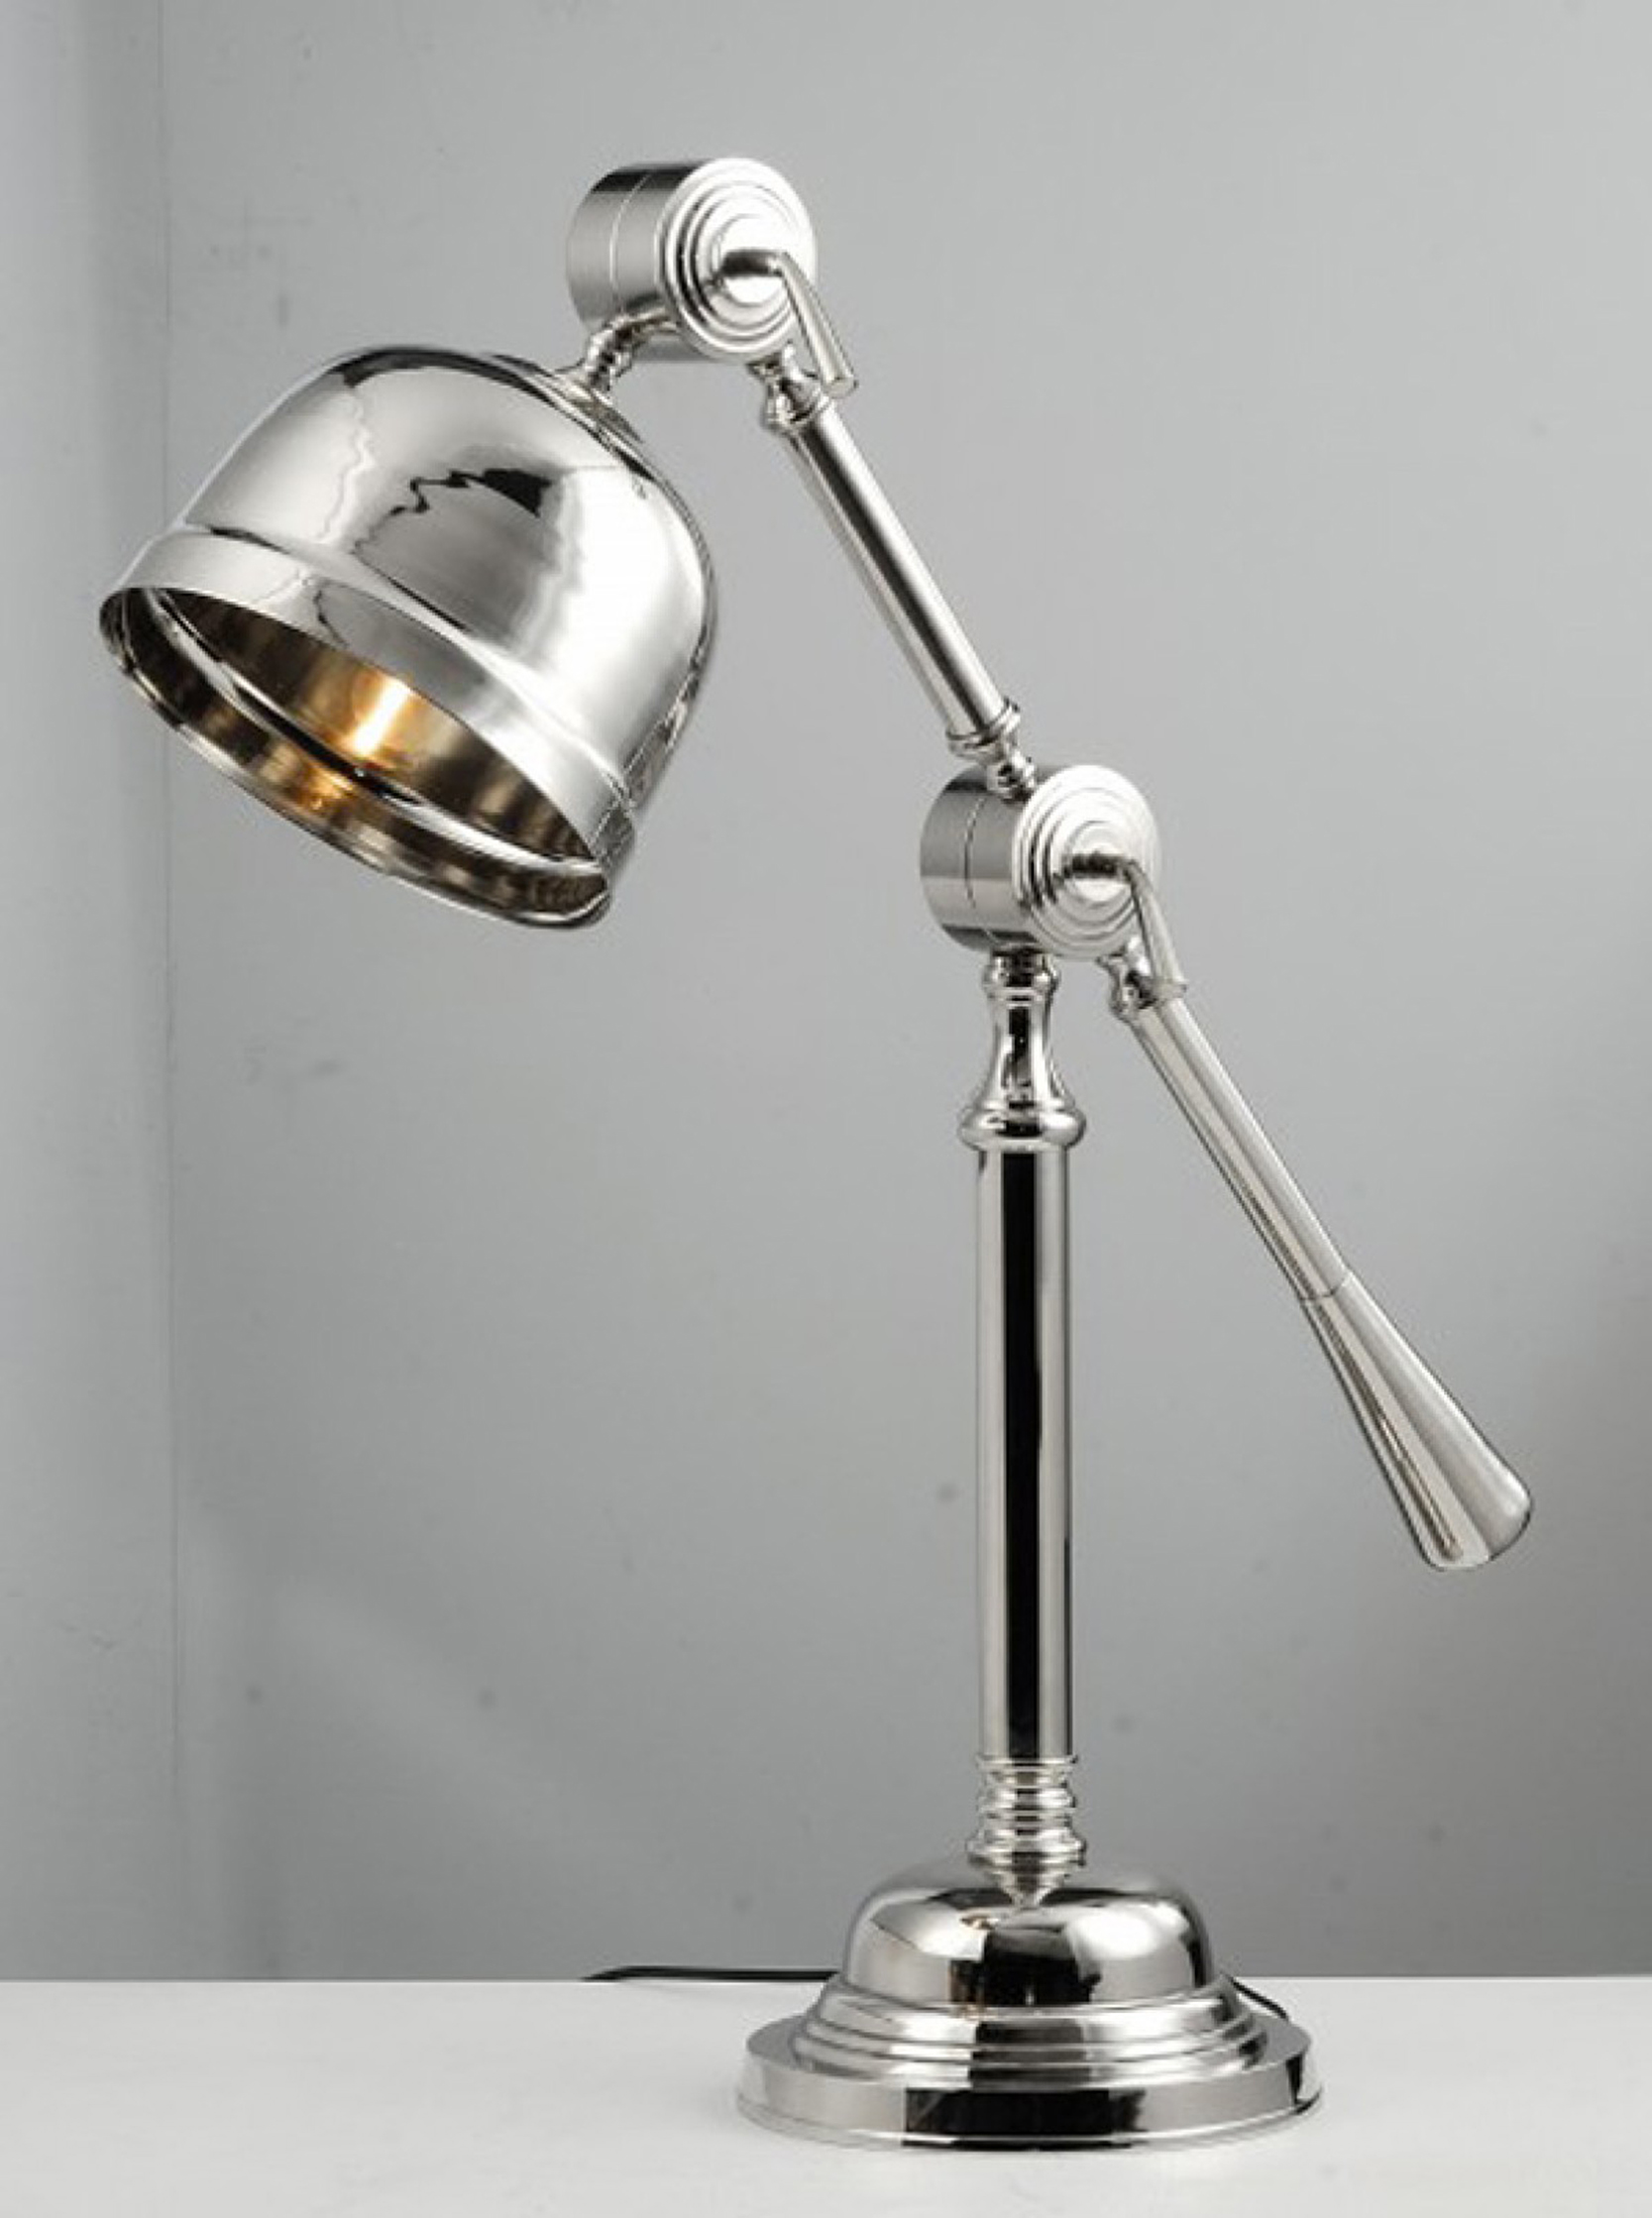 Find a great silver lamp lamp deal at Advanced Interior Designs